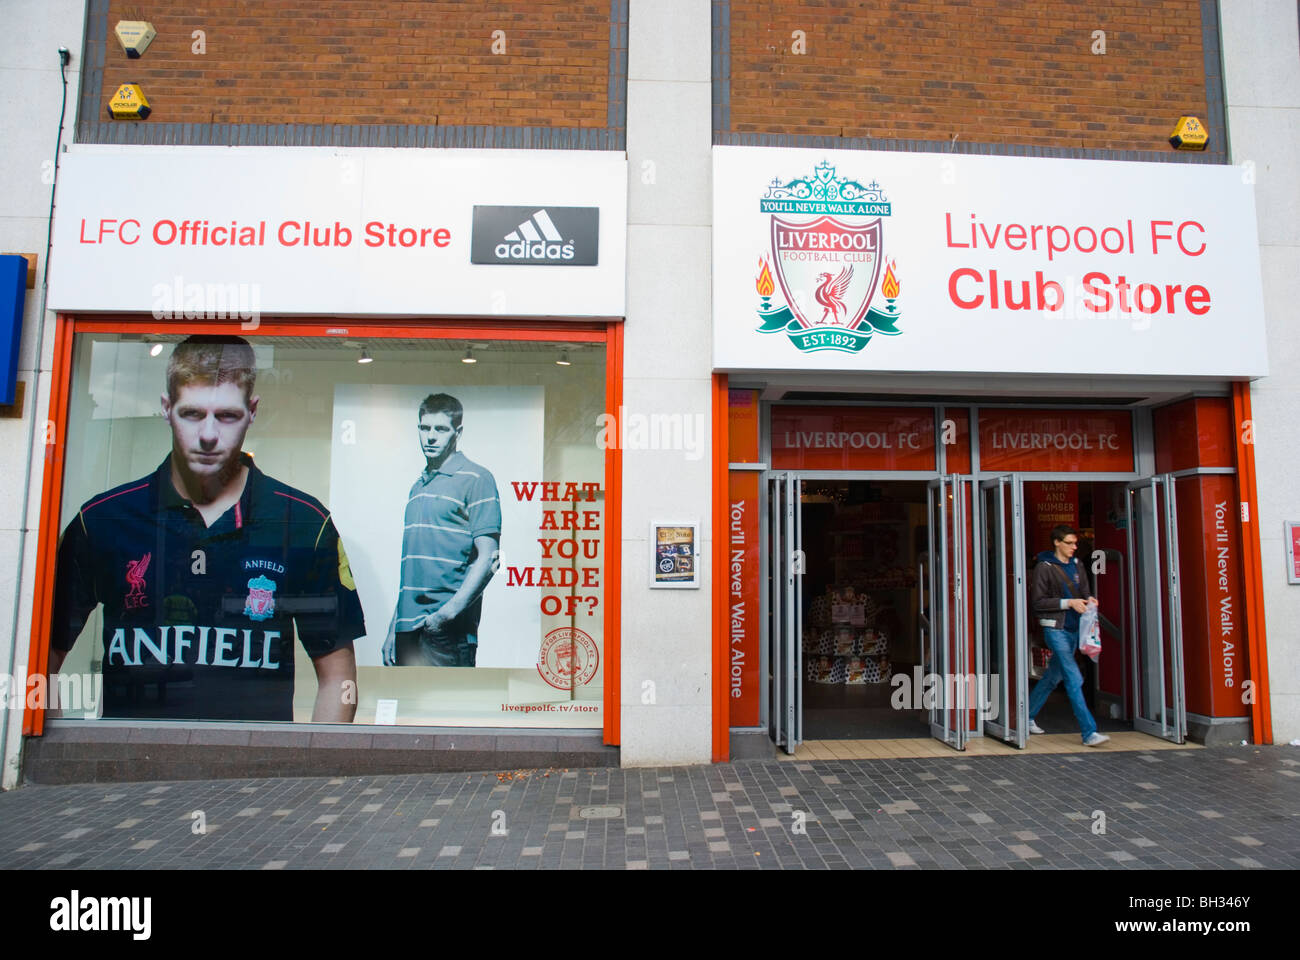 Liverpool FC club store Queen Squre Liverpool England UK Europe Stock Photo